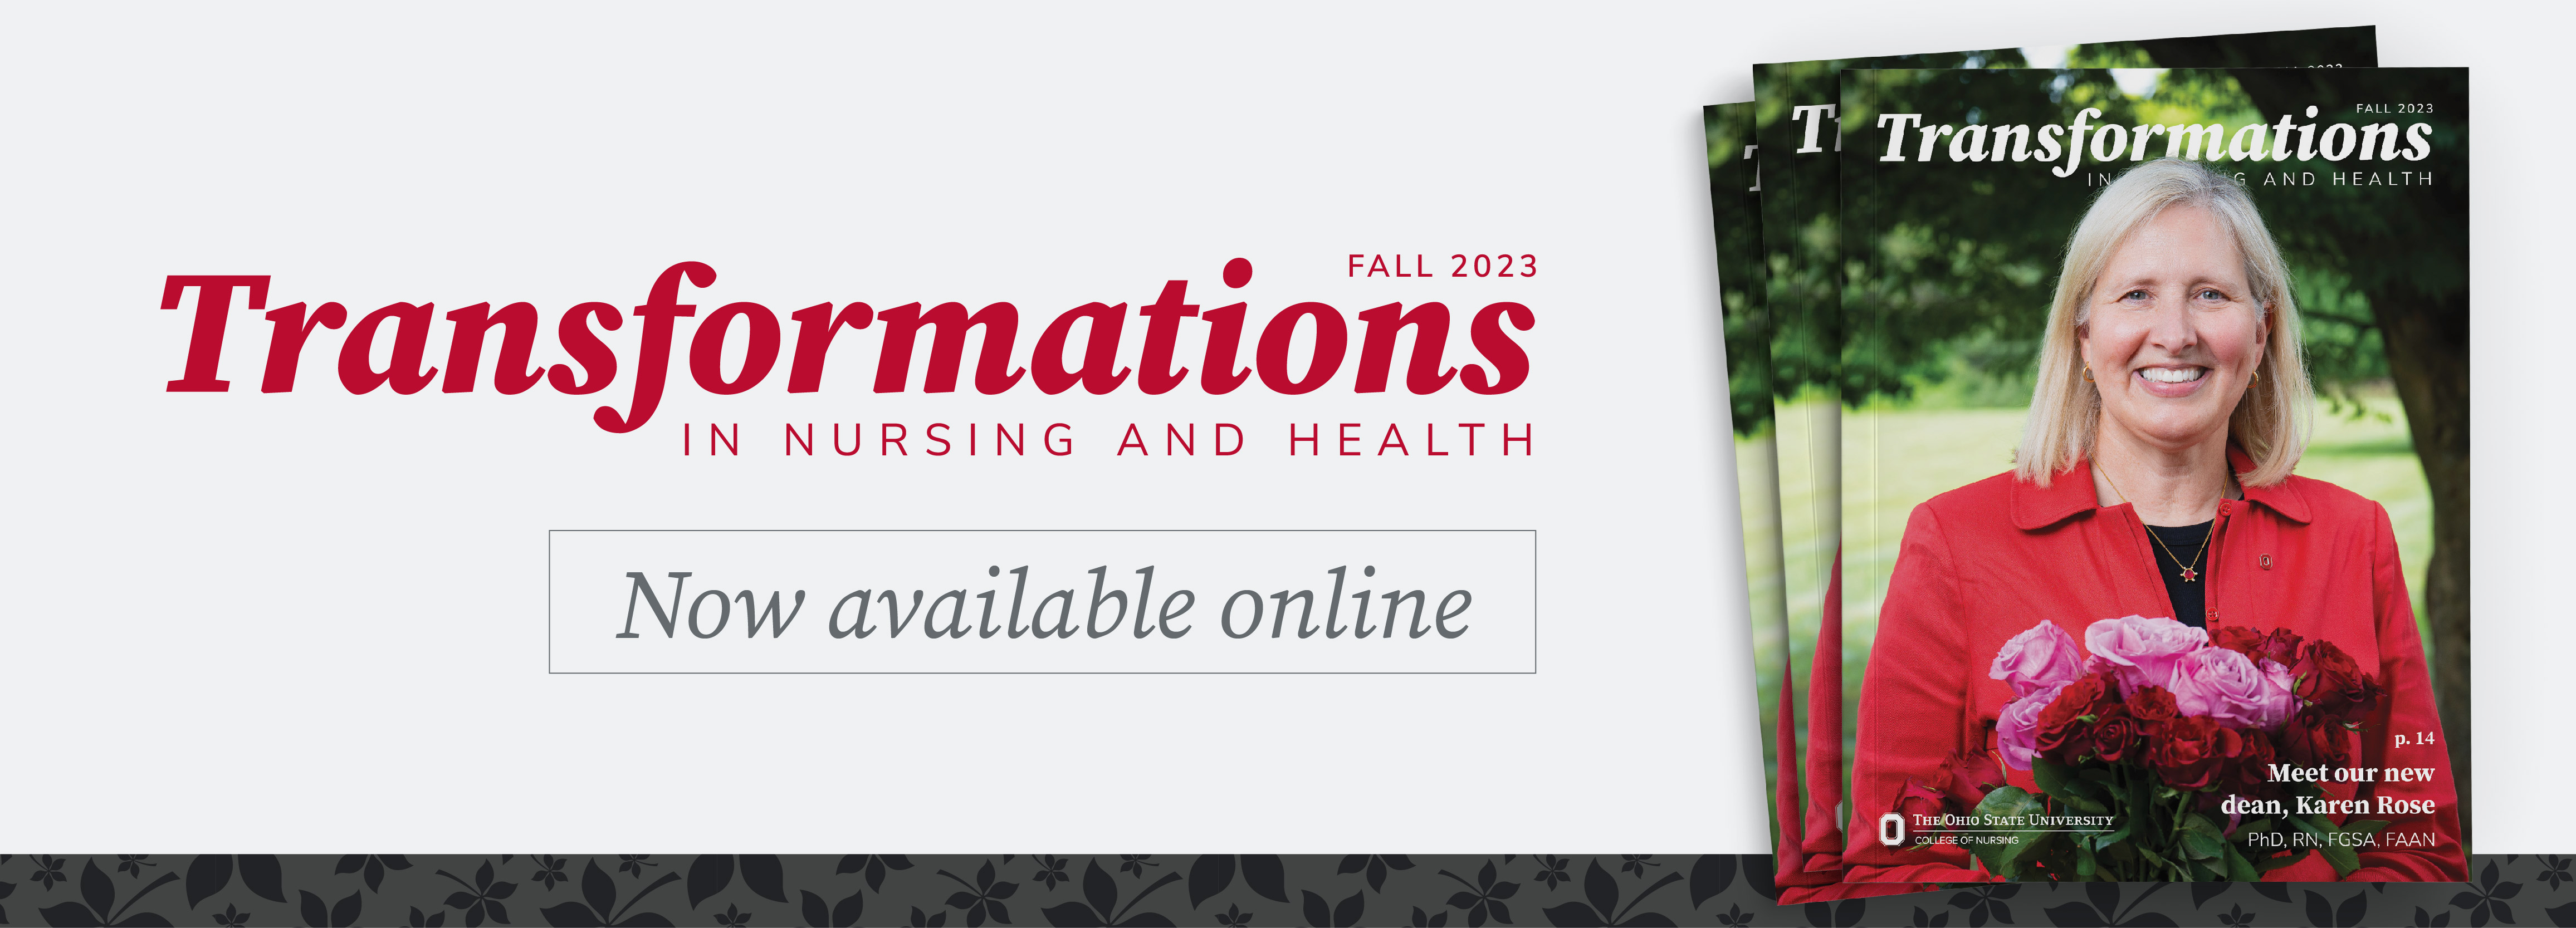 Transformations Fall 2023 now available online